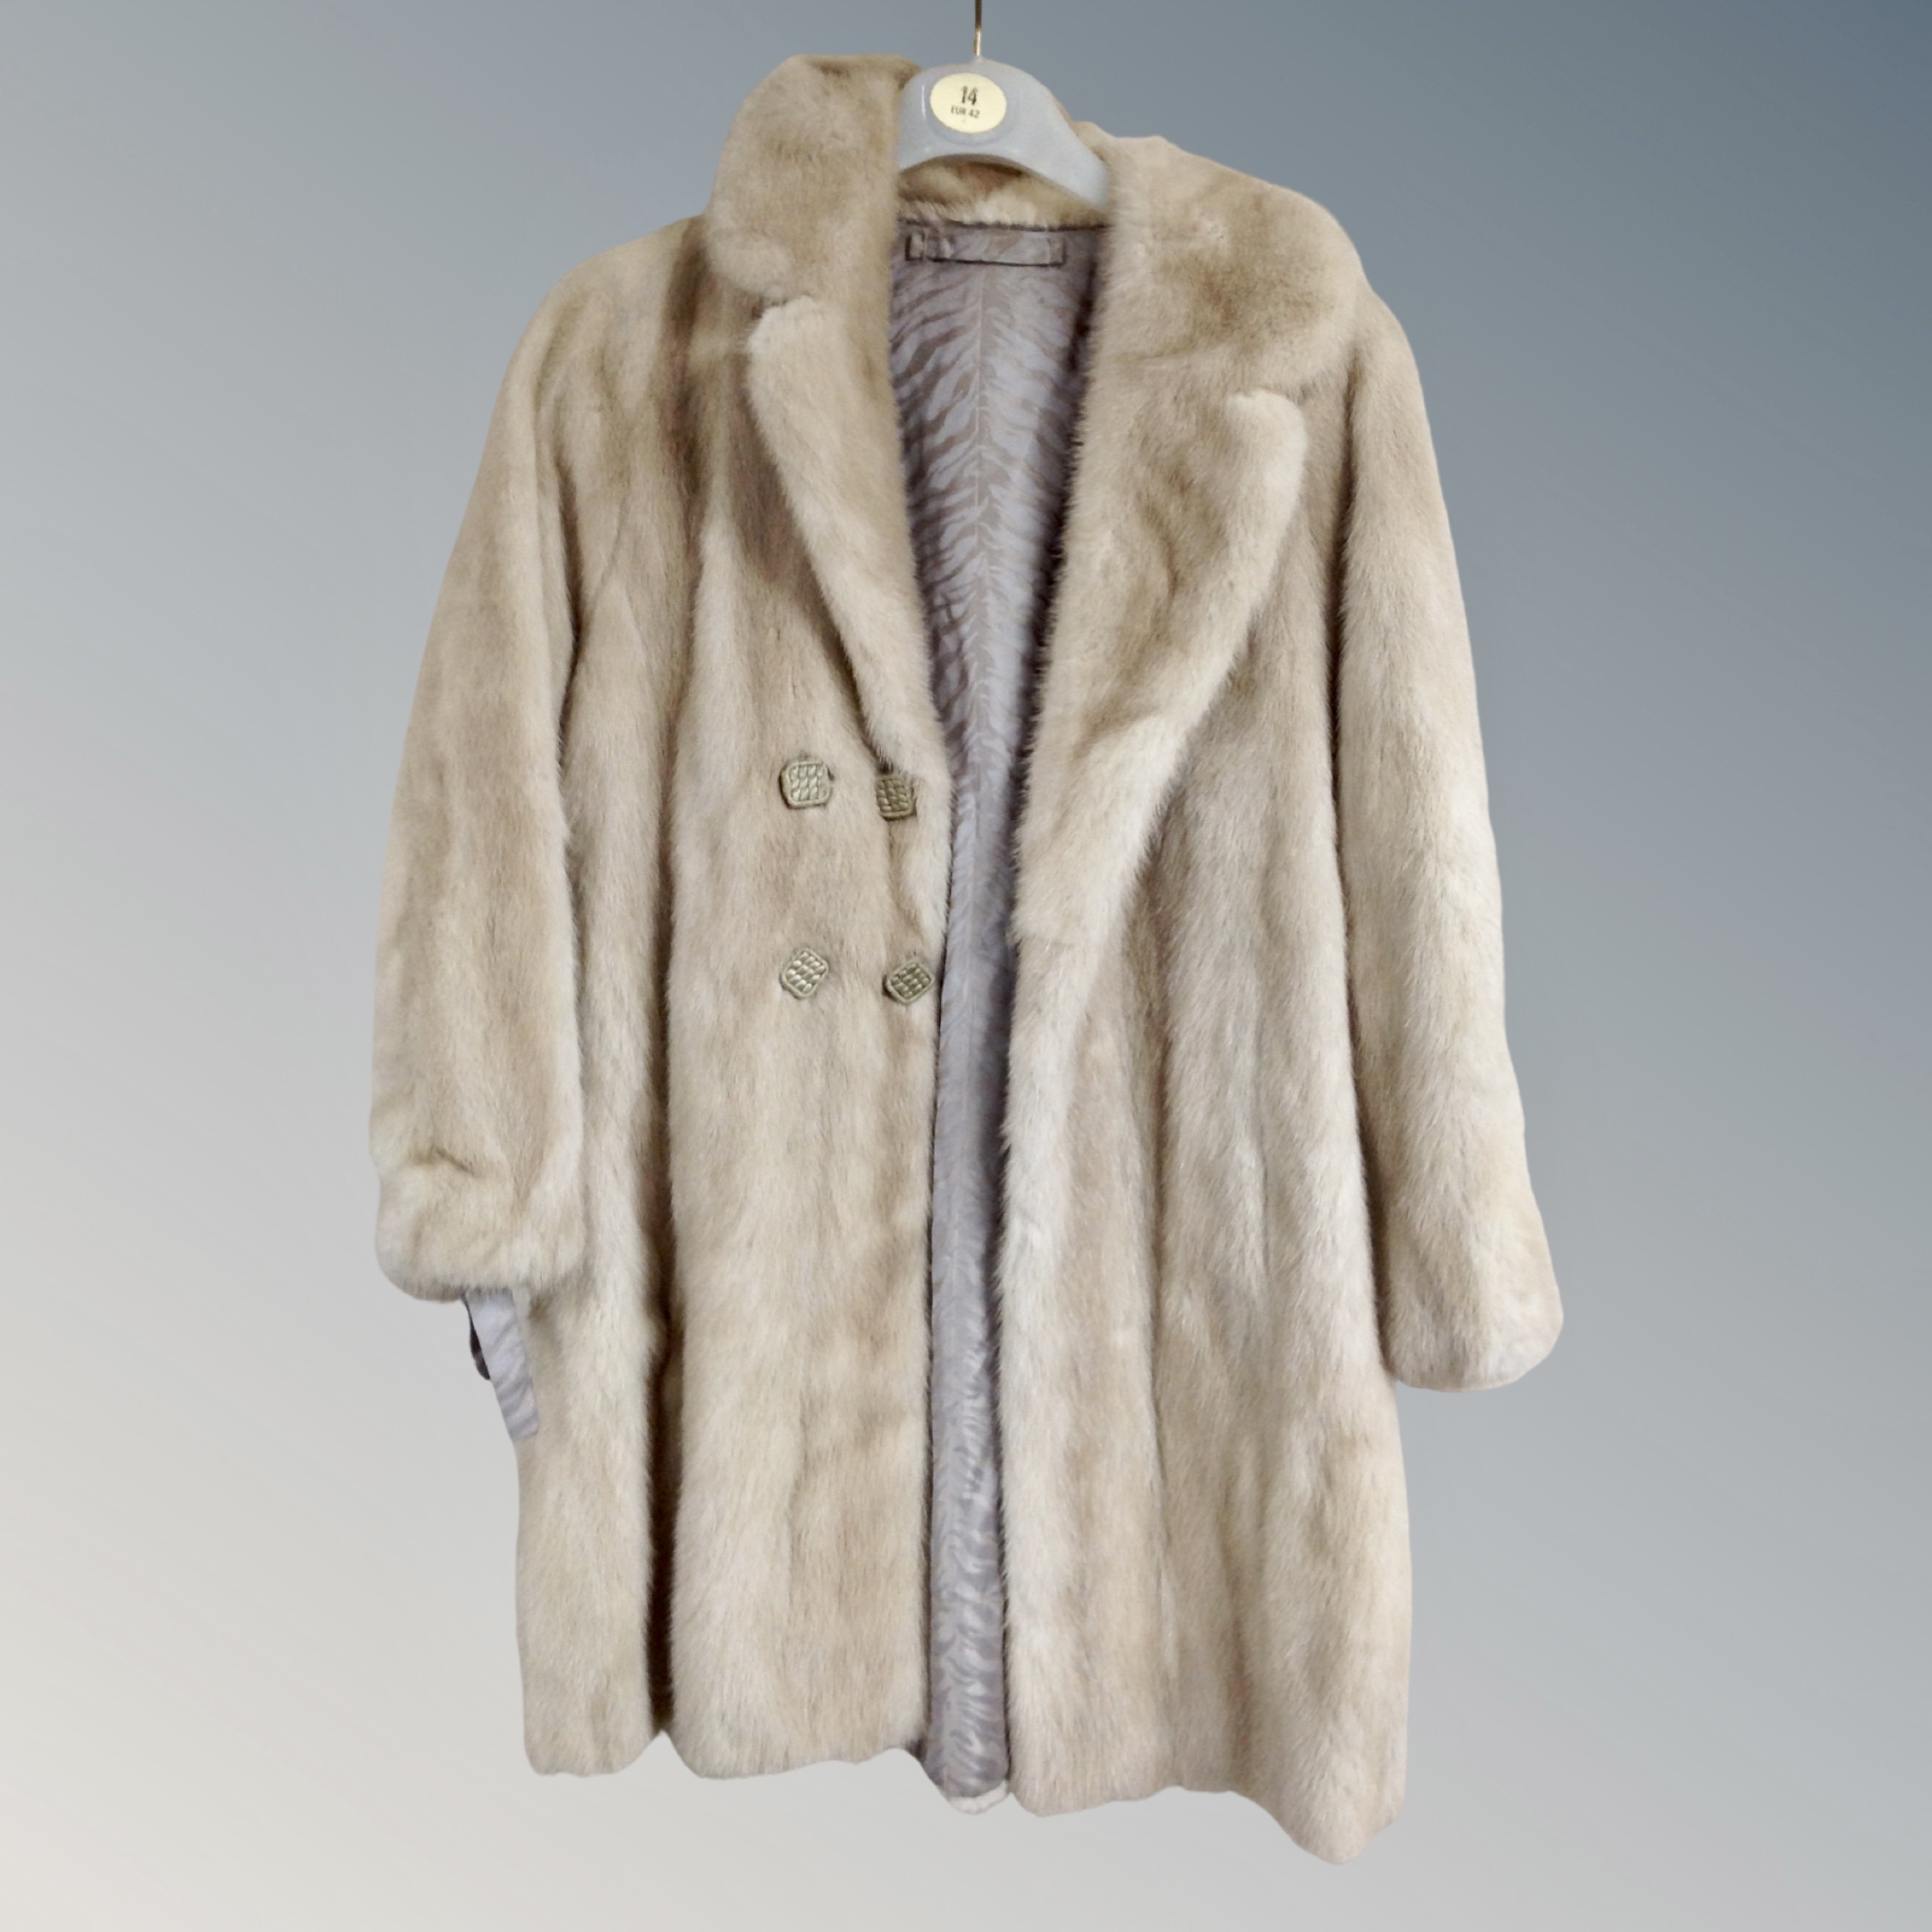 An early 20th century white mink coat together with a wool Crombie coat. - Image 2 of 2